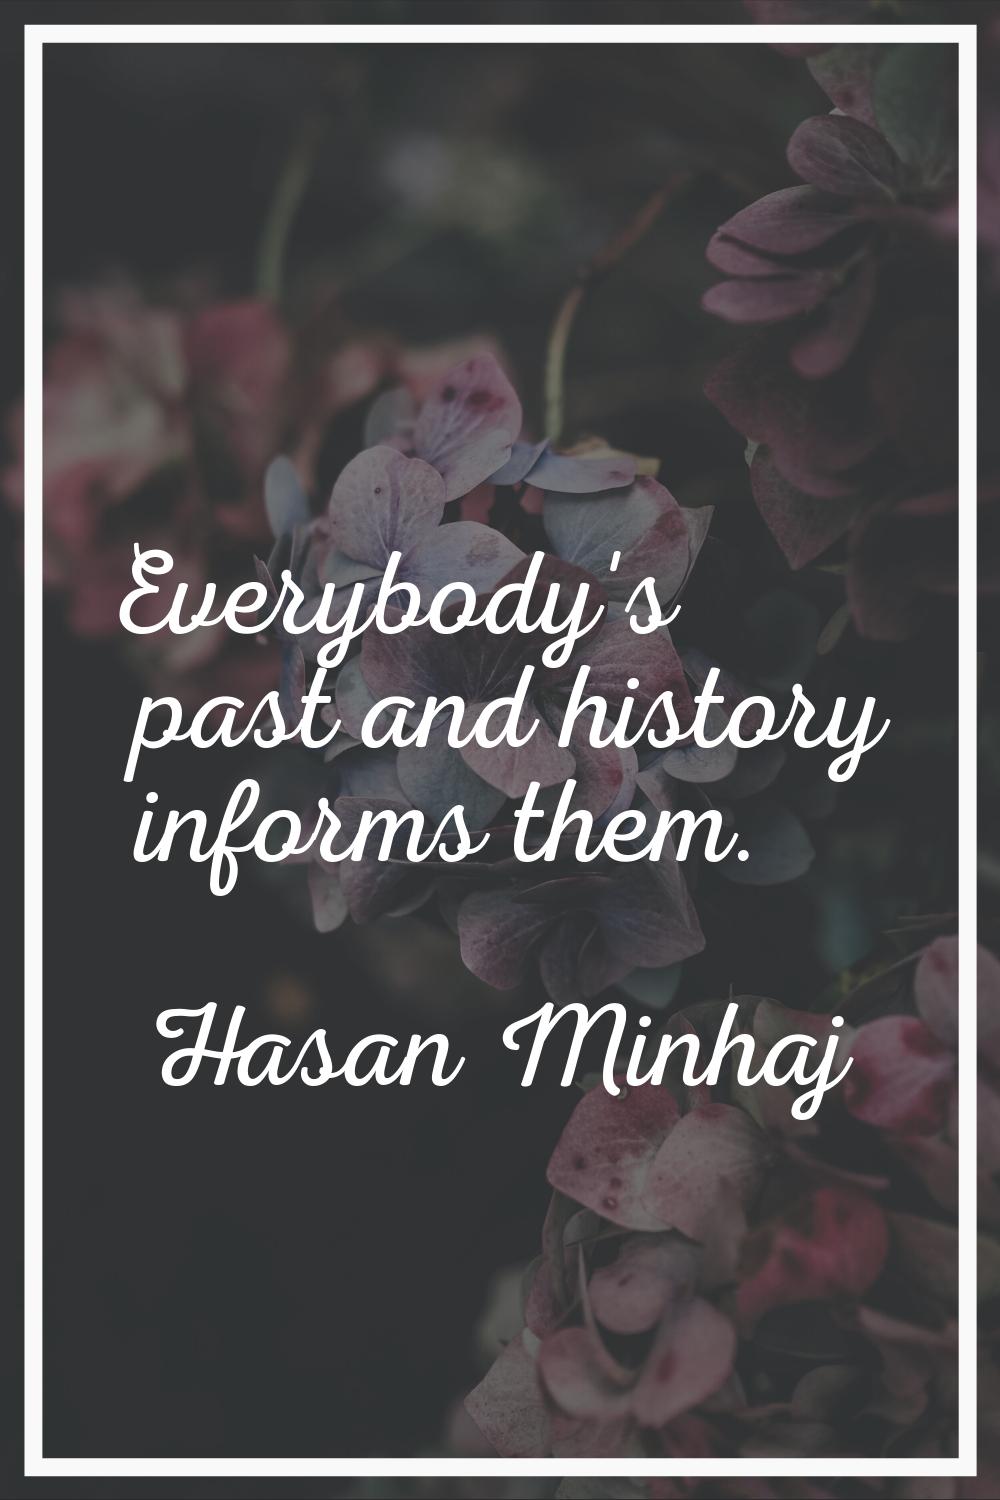 Everybody's past and history informs them.